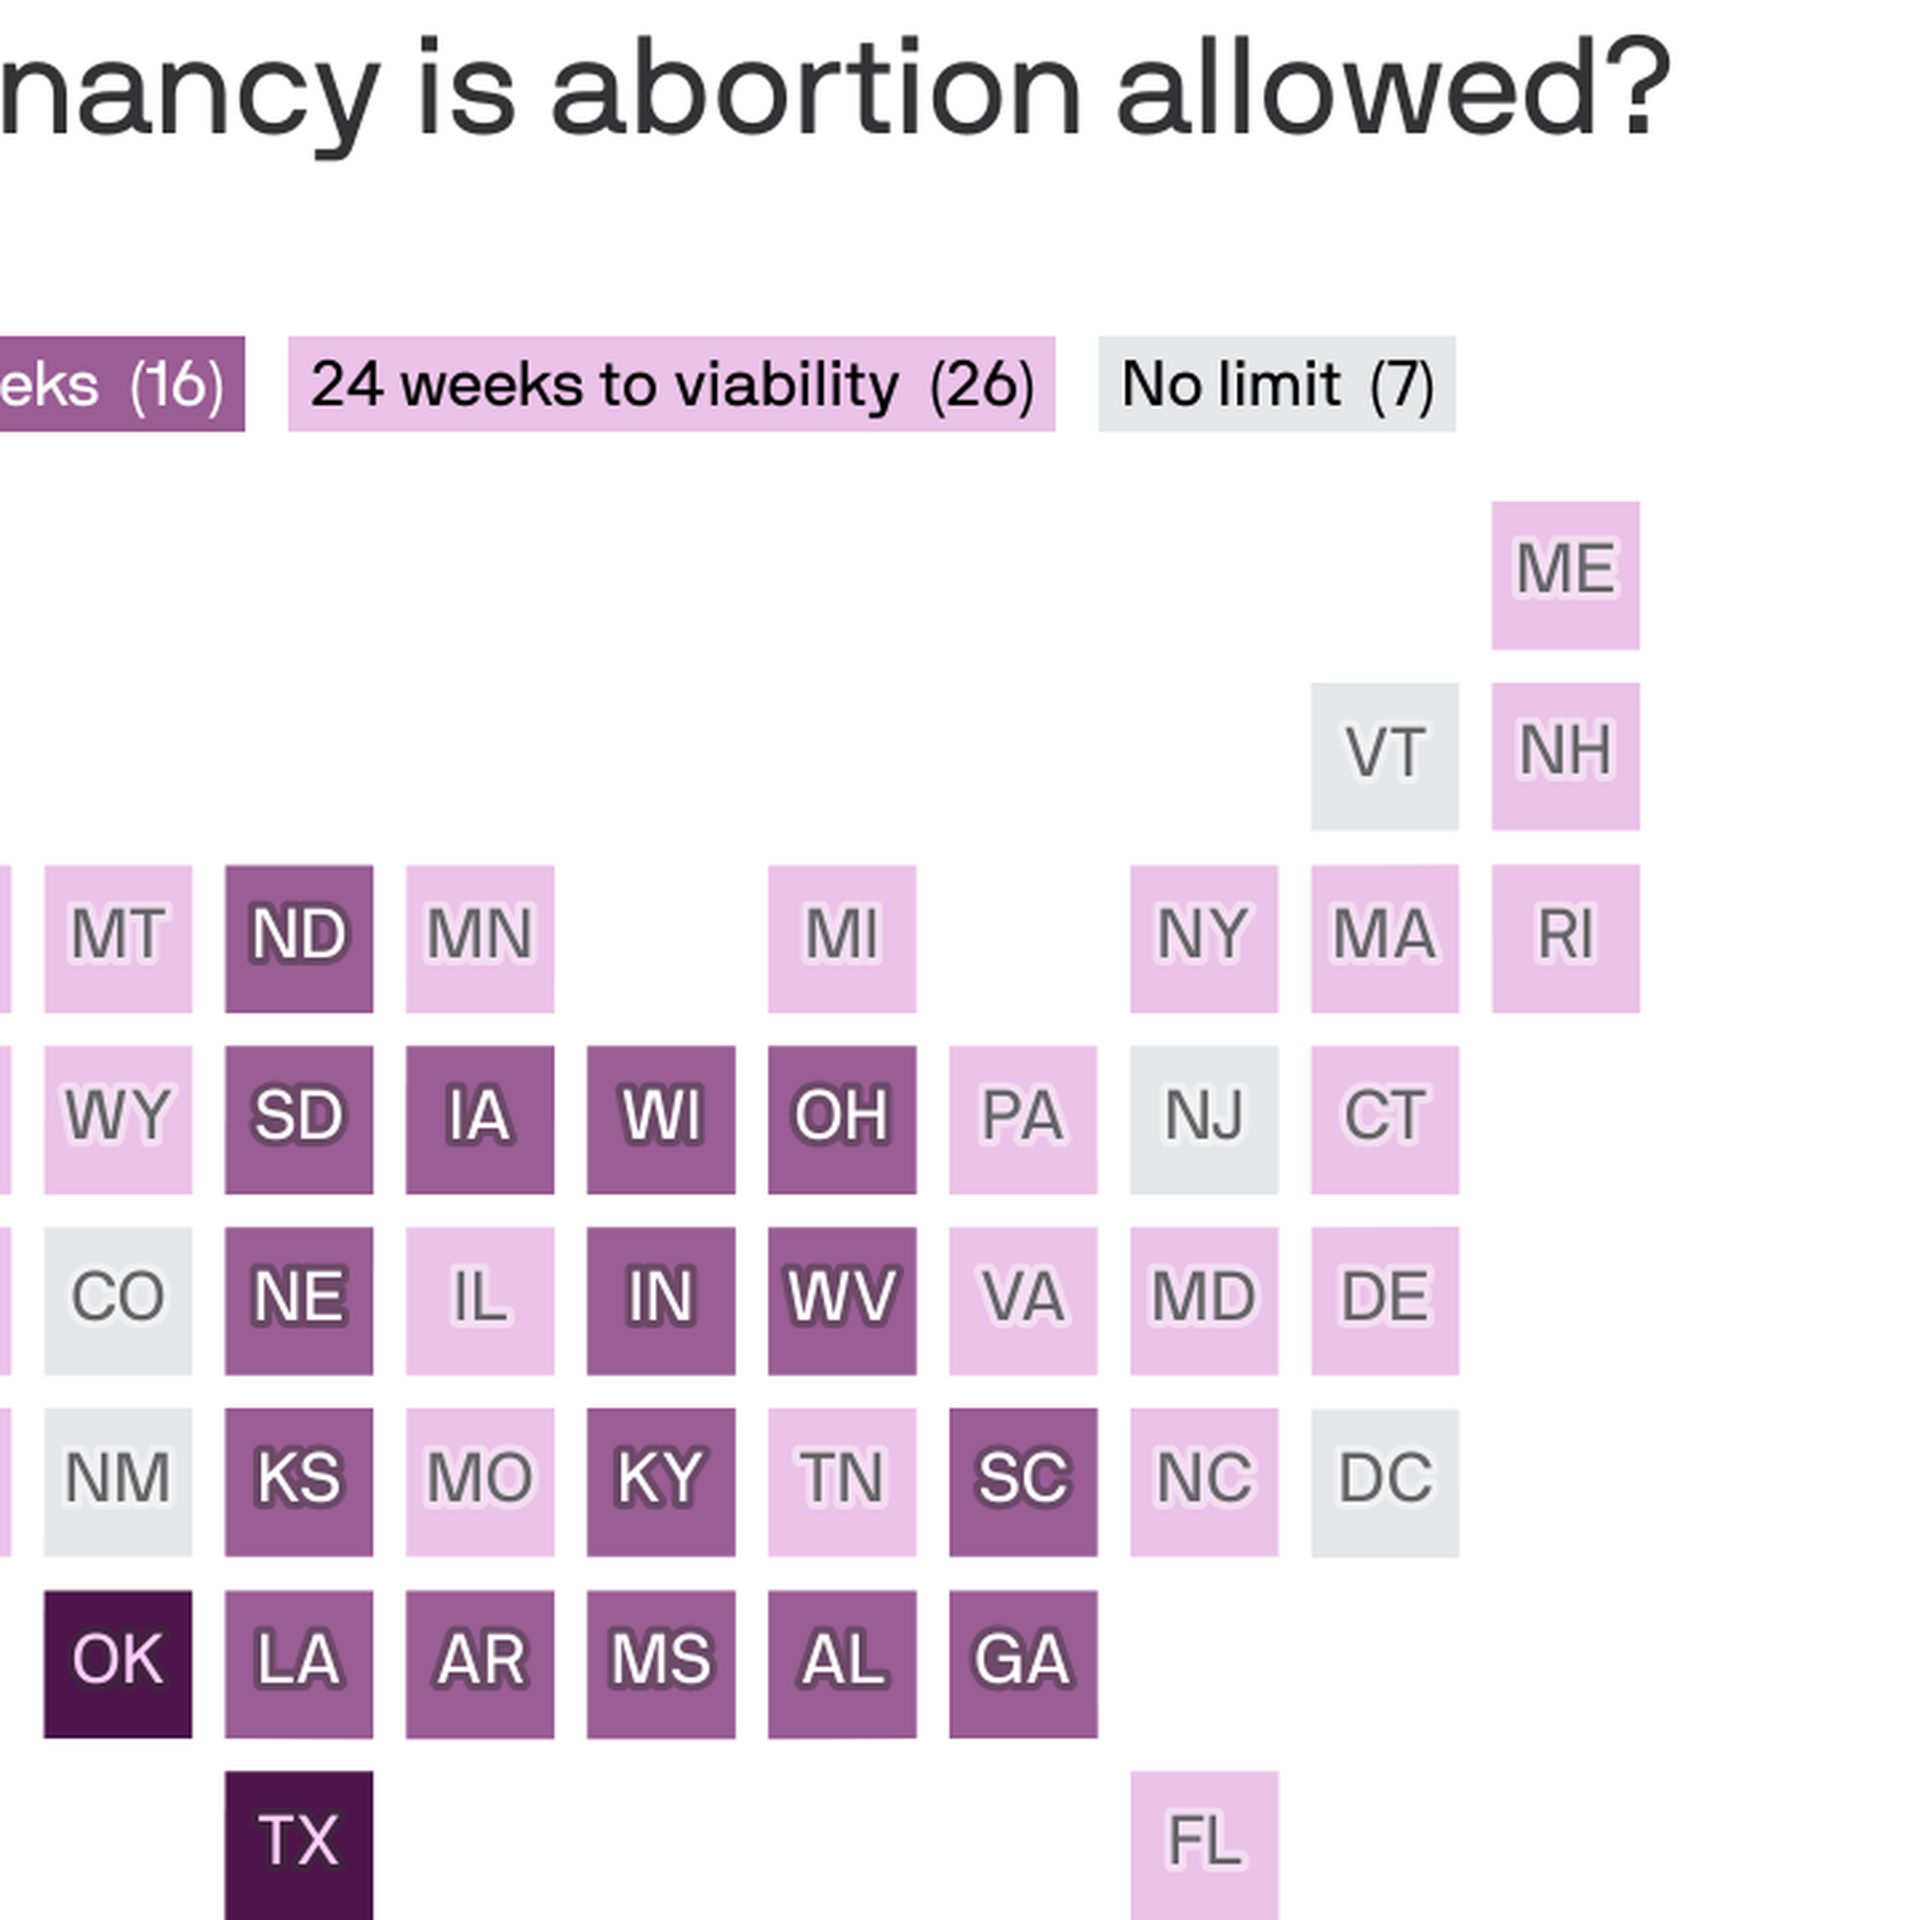 Map showing the limits at which abortions are allowed in each state.